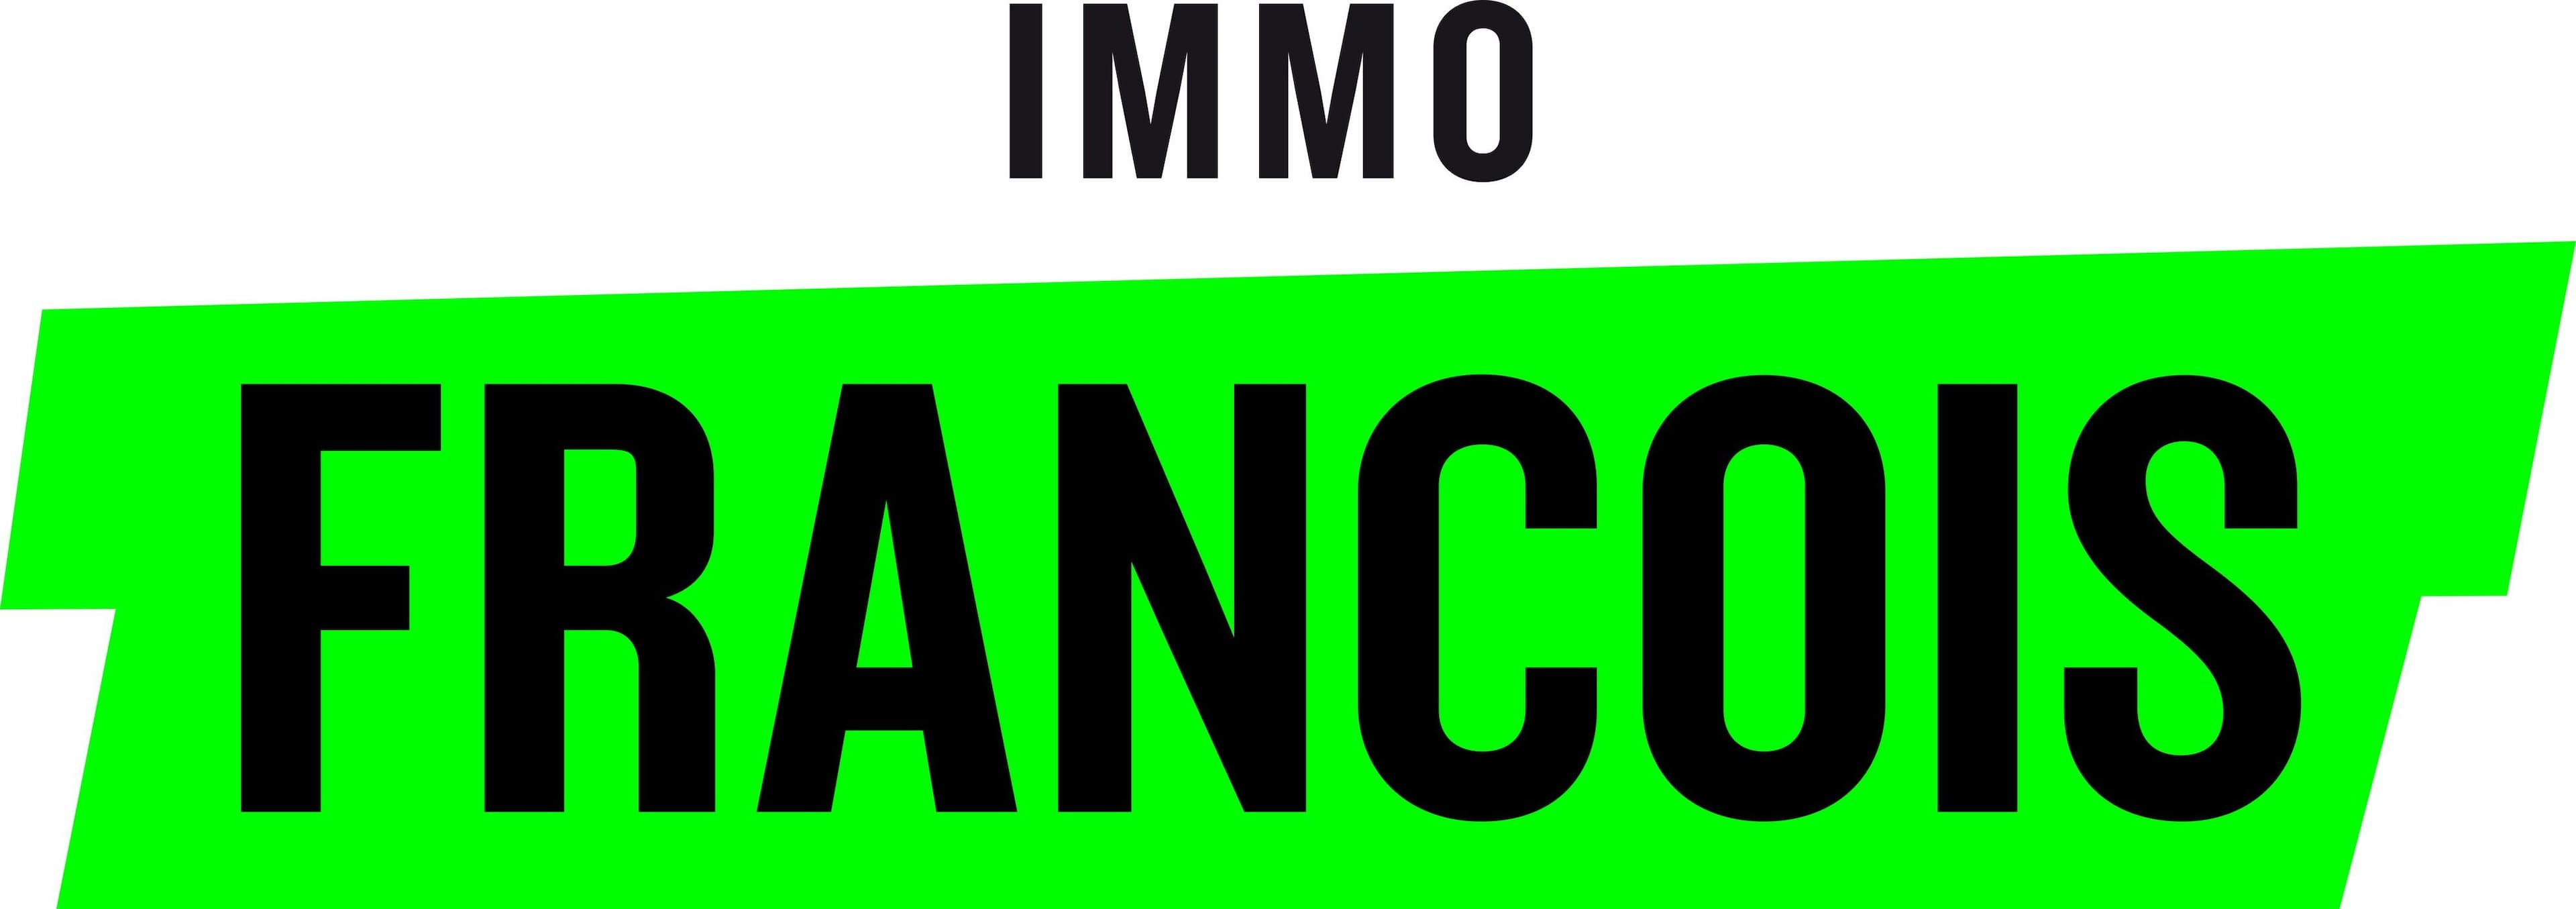 Immo Francois OOSTENDE